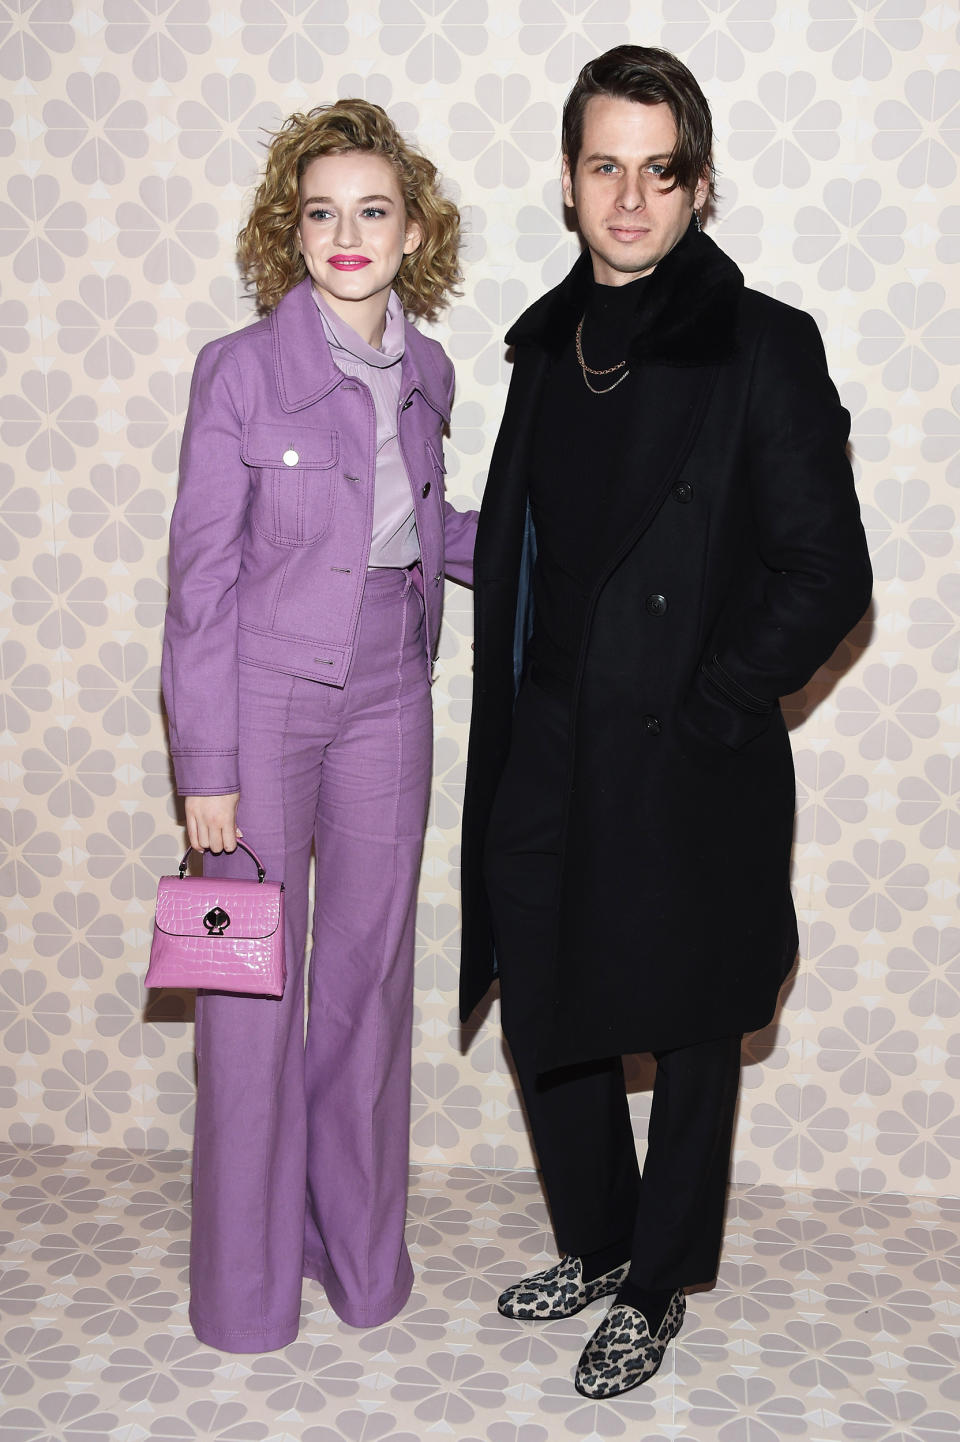 Kate Spade New York - Arrivals - February 2019 - New York Fashion Week (Dimitrios Kambouris / Getty Images)